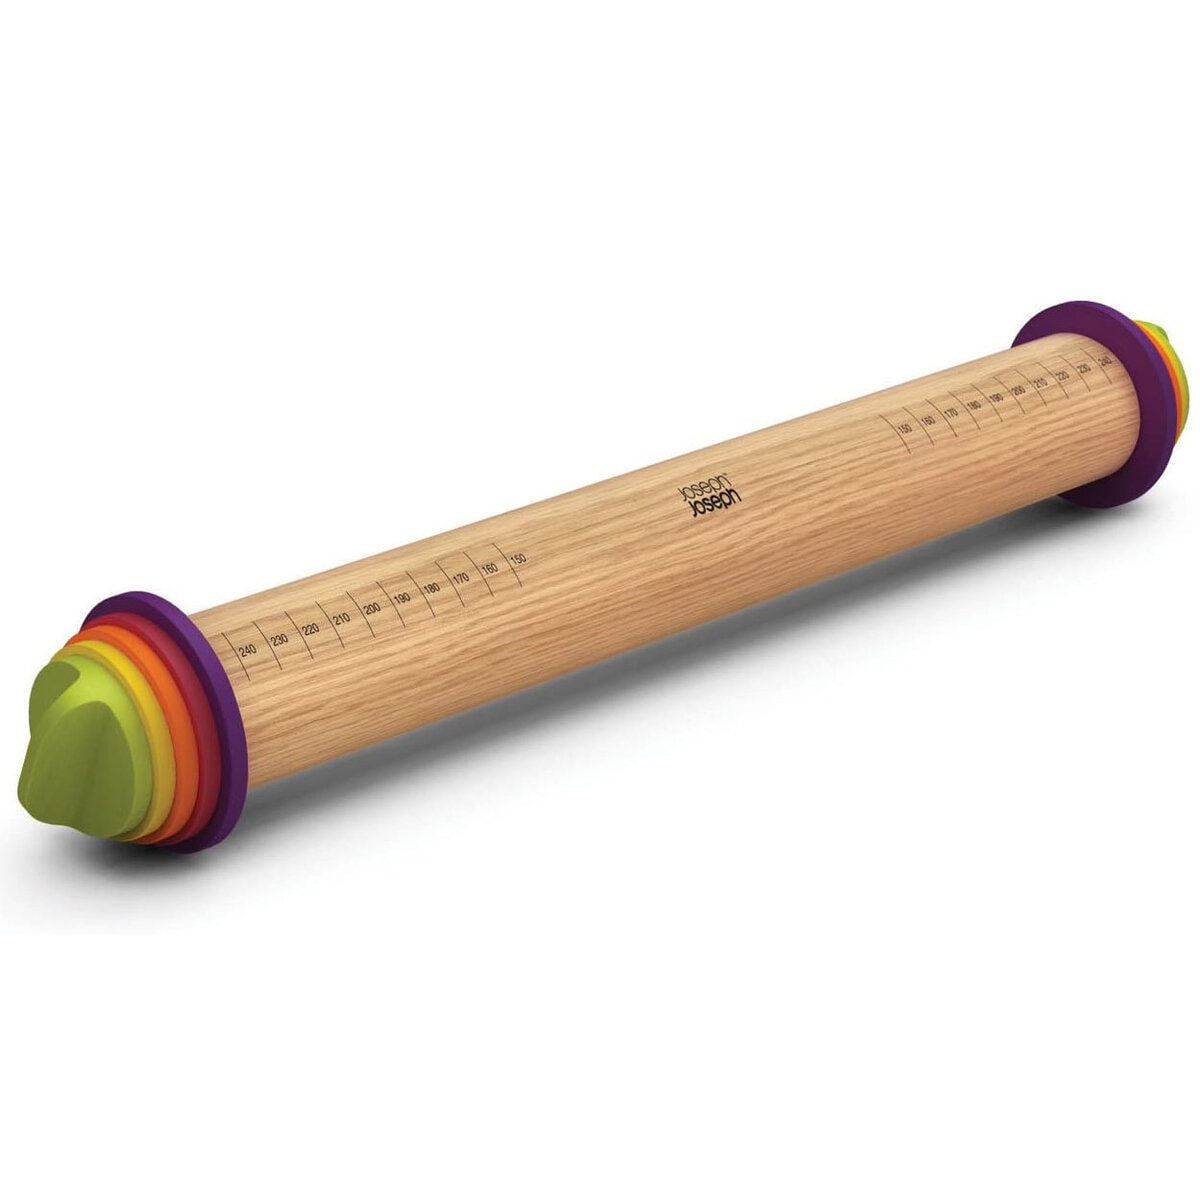 Adjustable rolling pin.